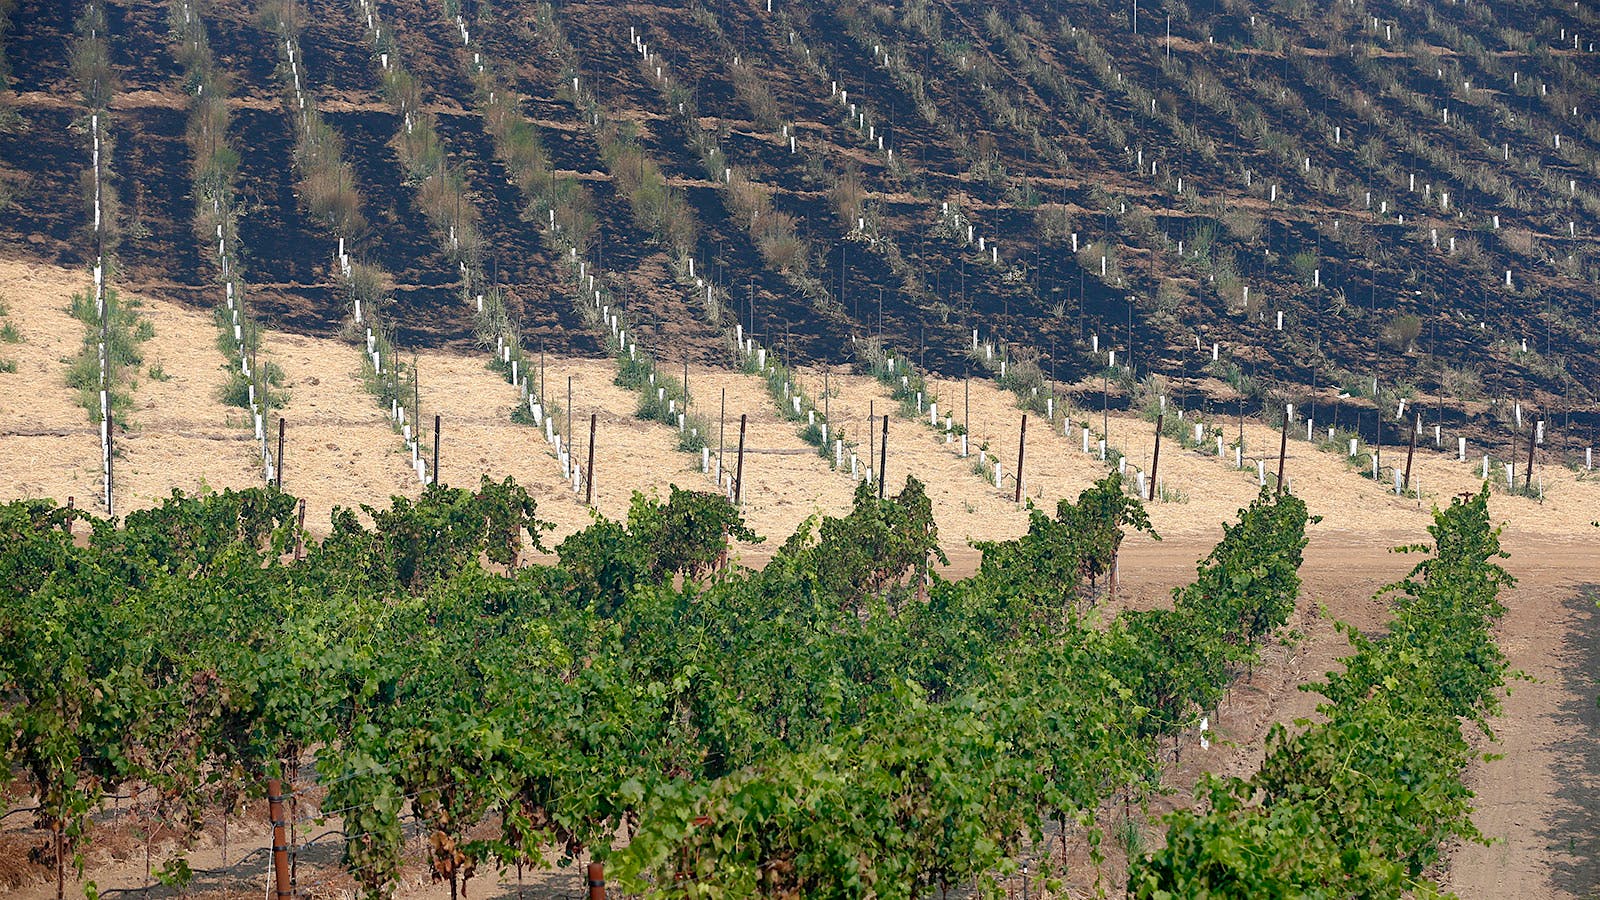 A partially scorched vineyard in Geyserville, Calif.